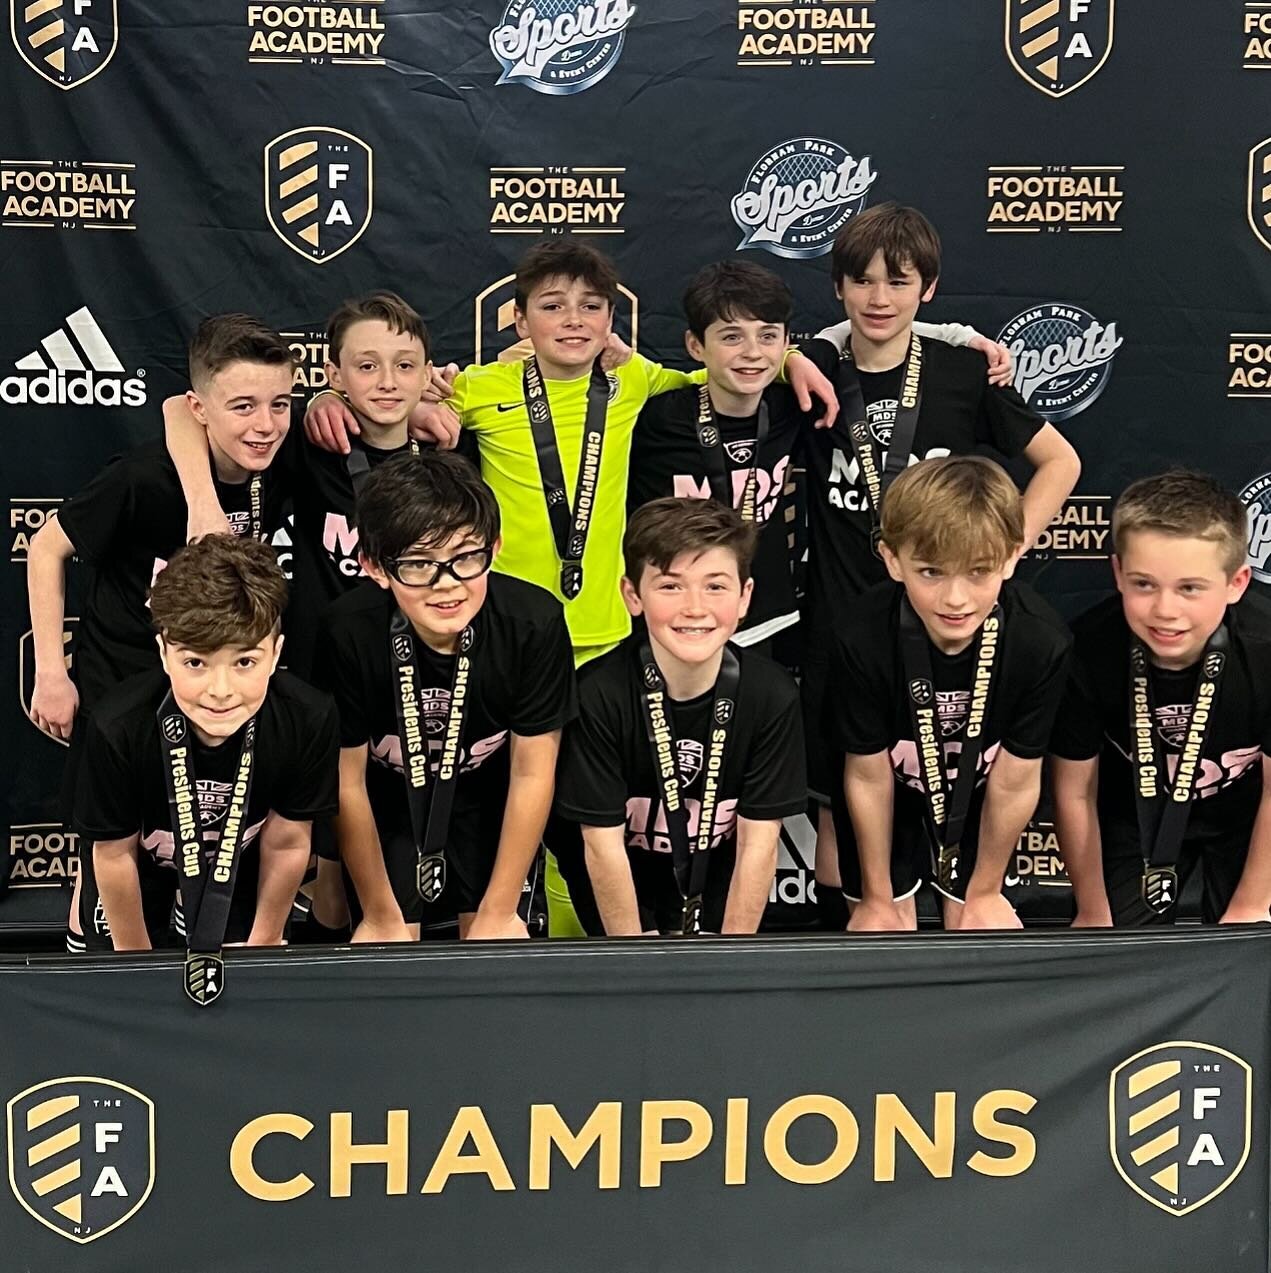 MDS Academy had themselves a day at our good friends @footballacademy_nj PresidentsDay Tourney on Saturday. A display of brilliant football not just from one, or two teams but ALL FIVE!!! 

FIVE TEAMS - FIVE CHAMPIONS 
U10&rsquo;s, u10&rsquo;s, u11&r